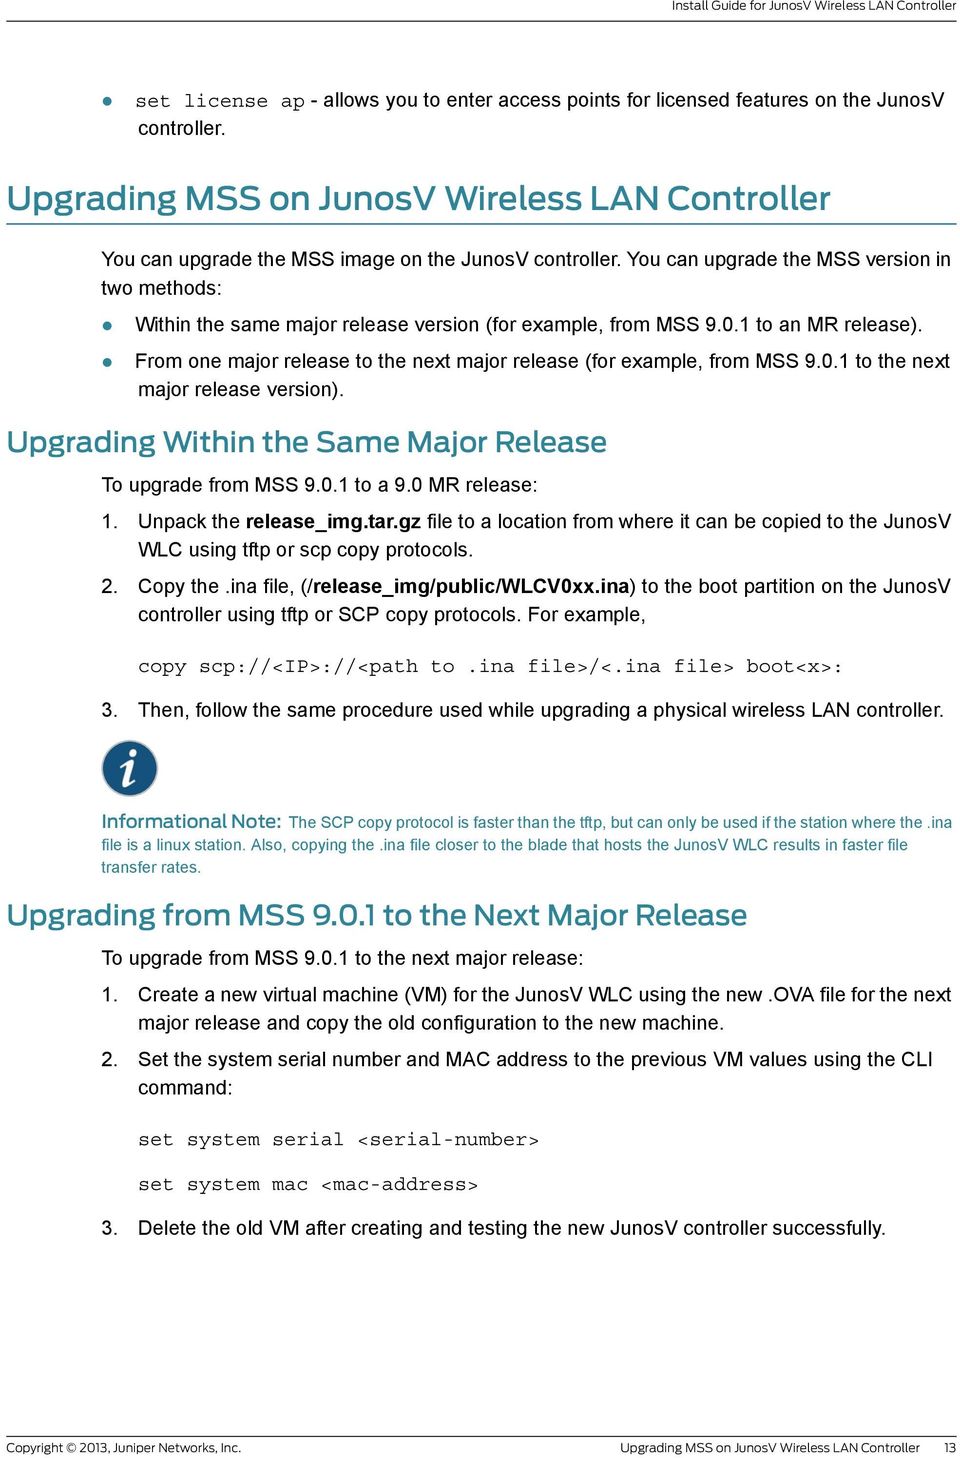 You can upgrade the MSS version in two methods: Within the same major release version (for example, from MSS 9.0.1 to an MR release).